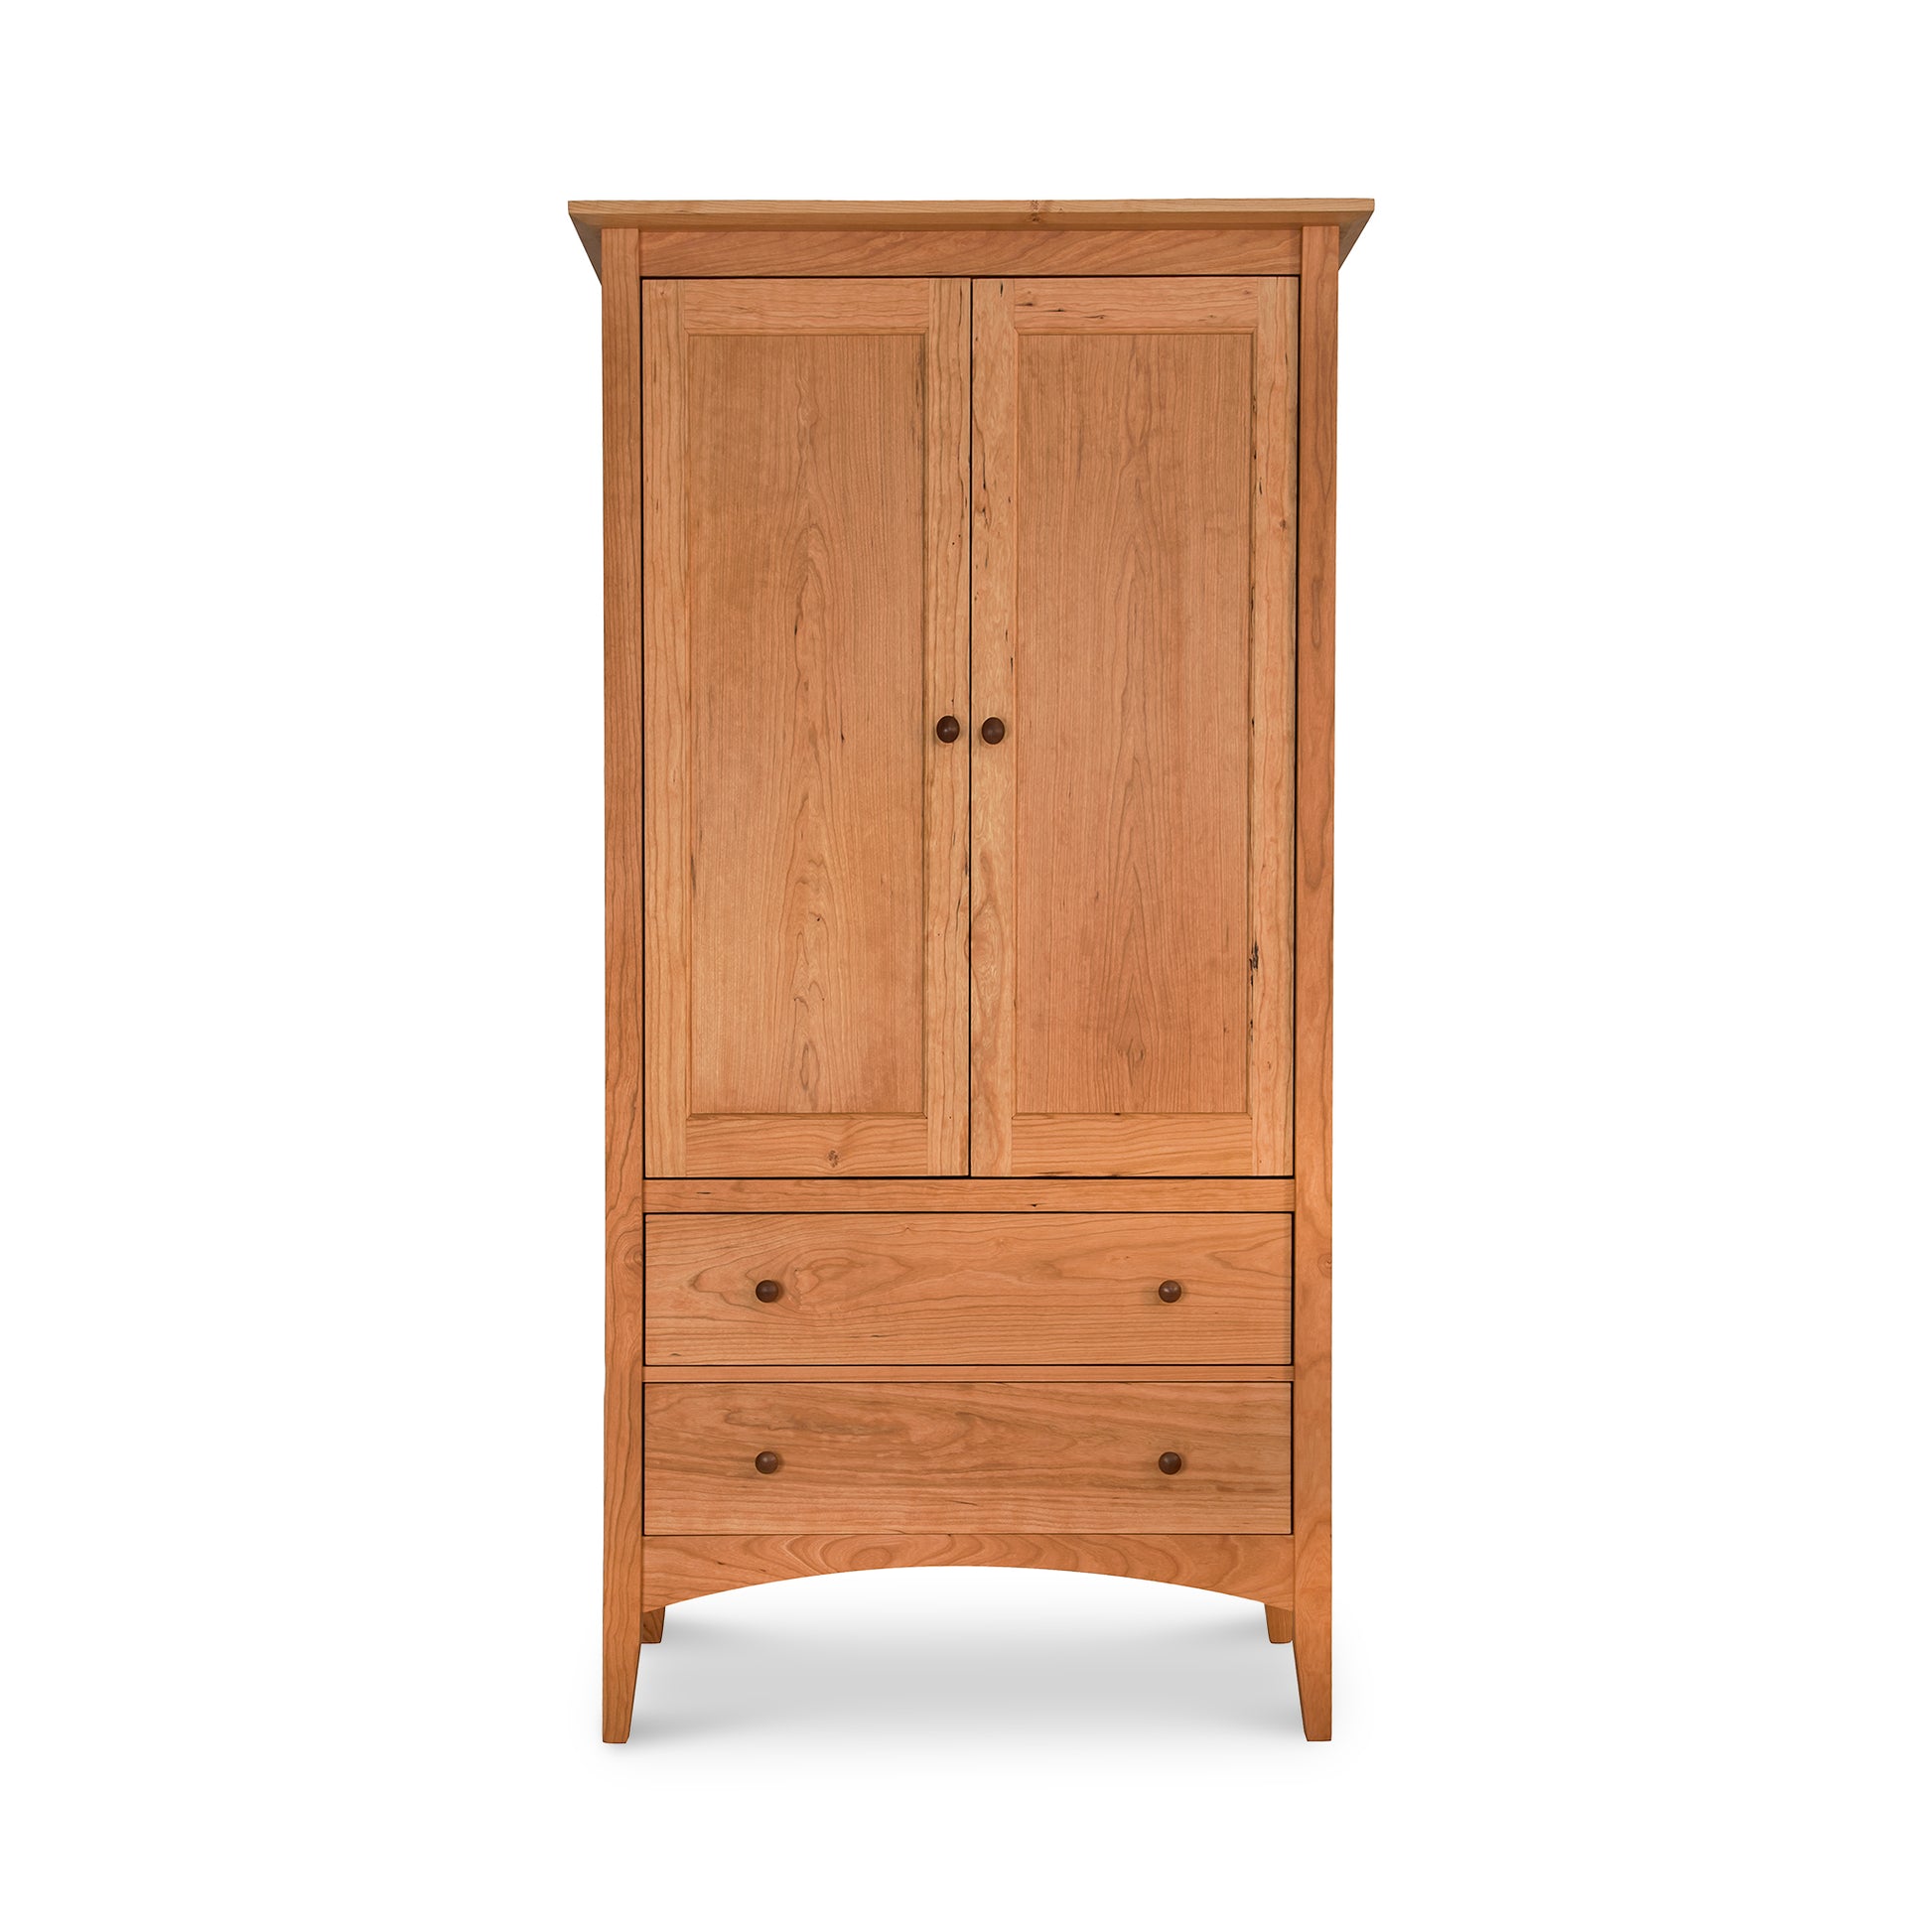 American Shaker Armoire wardrobe with two doors and three drawers, isolated on a white background by Maple Corner Woodworks.